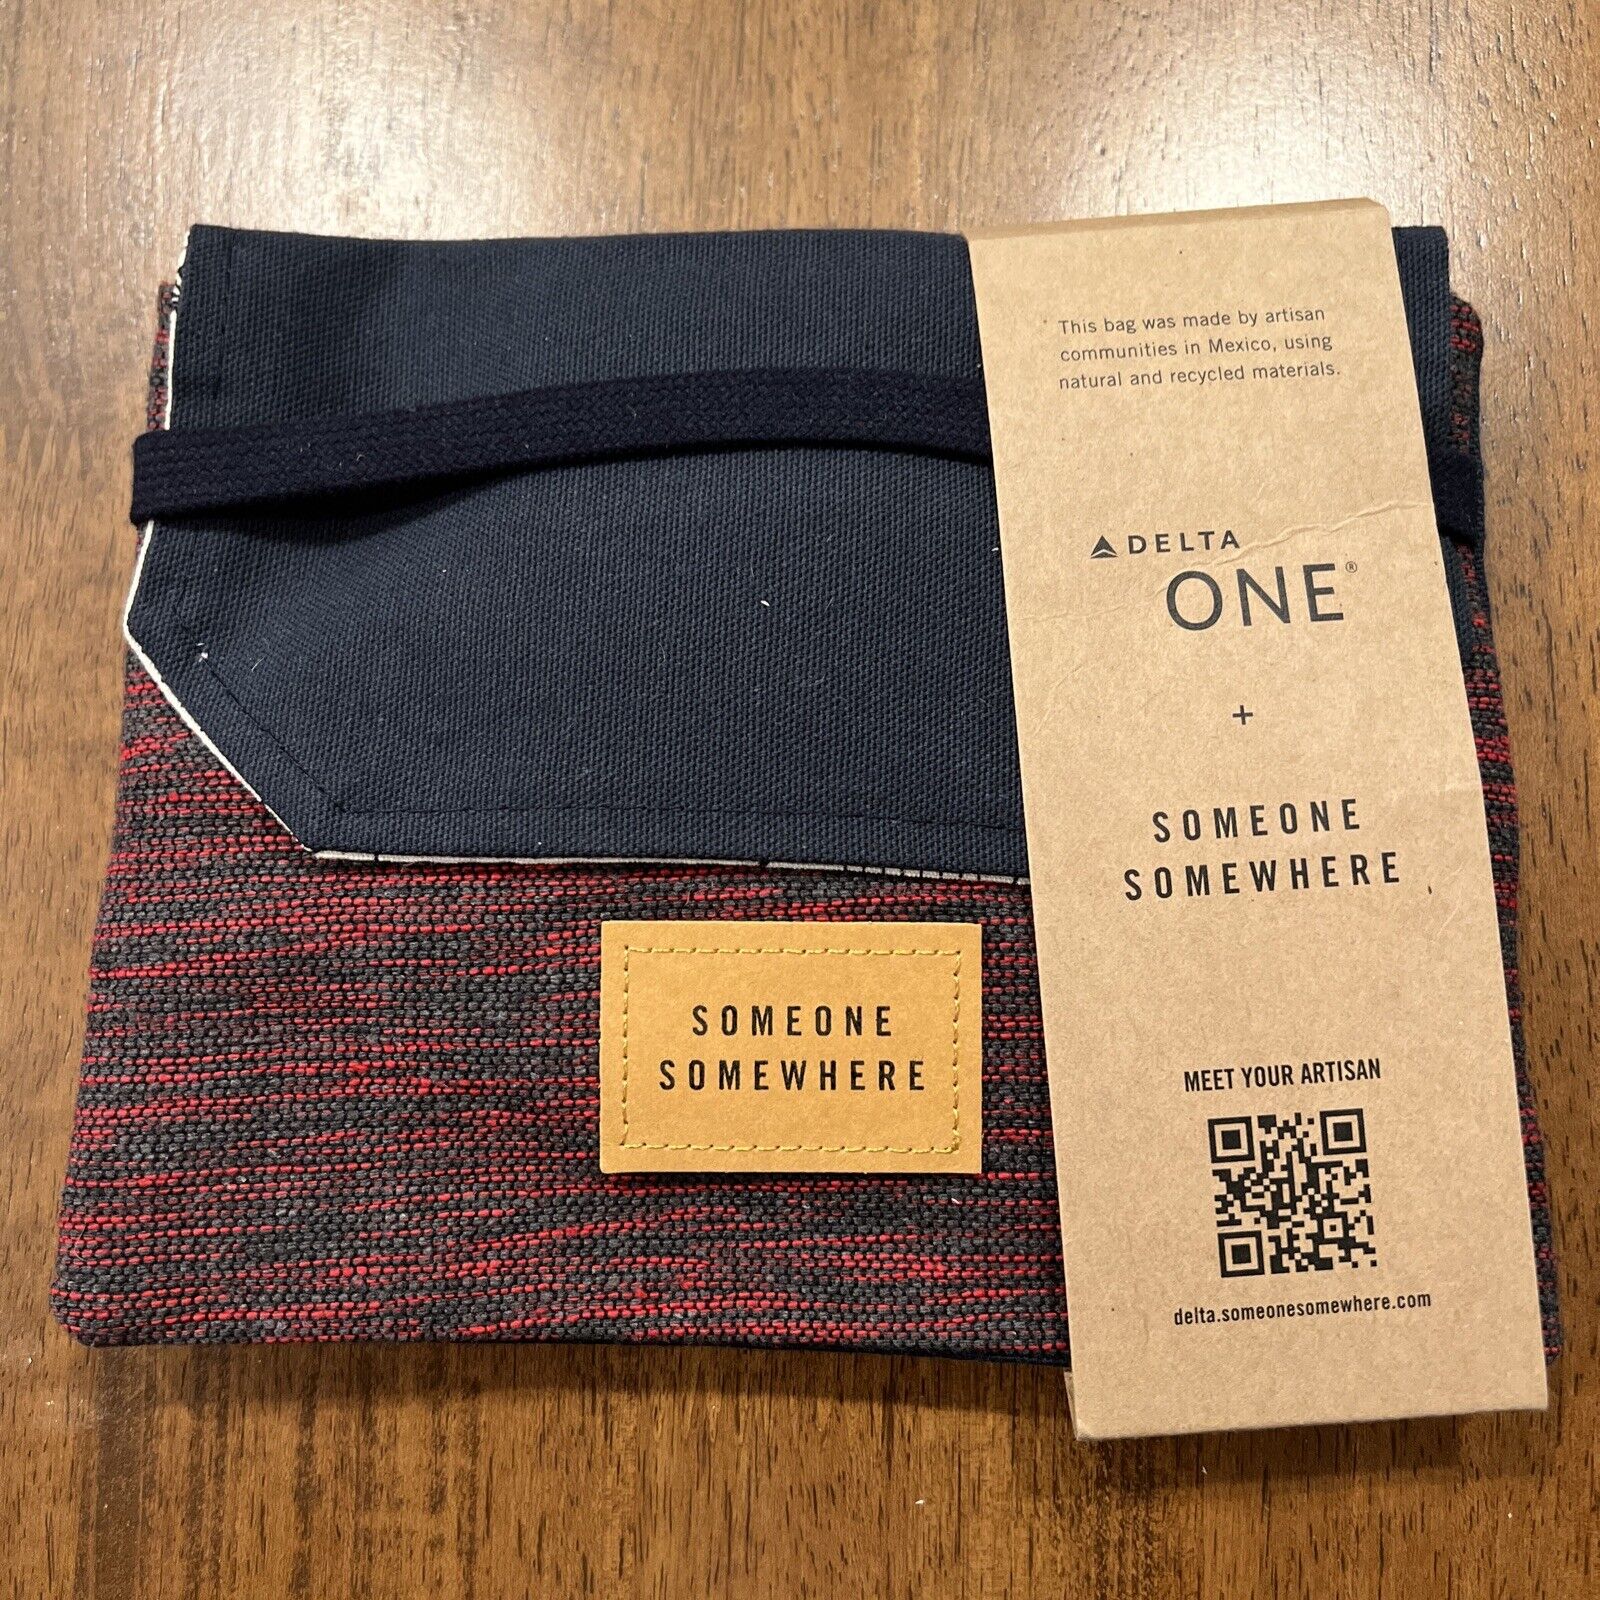 Delta Air Lines - Delta One Amenity Kit - Someone Somewhere w/ Content Inside